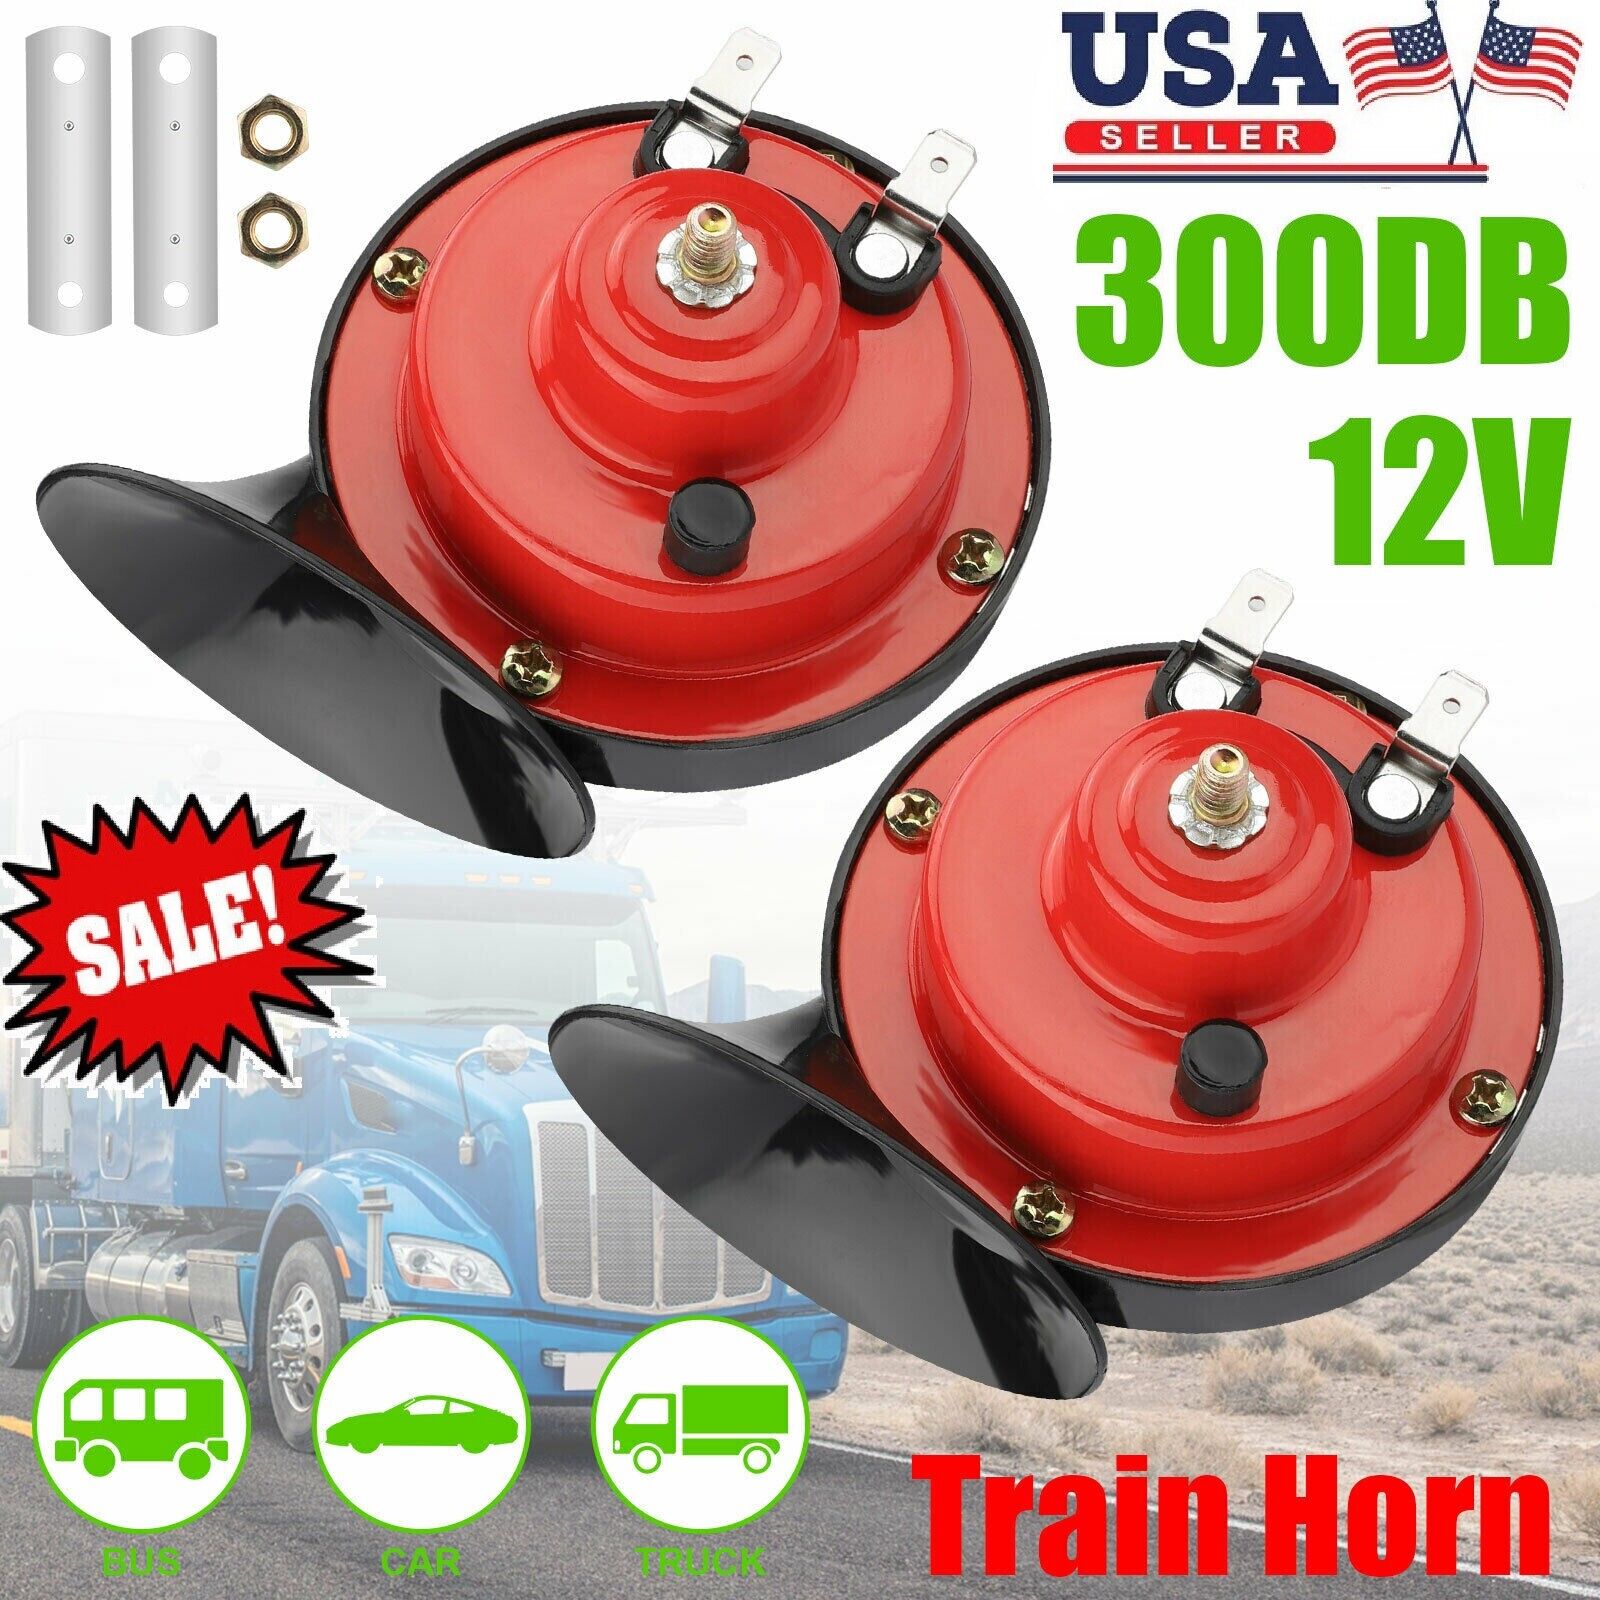 1Pair 300DB 12V Electric Super Train Snail Horn For Truck Car Boat Motorcycle US